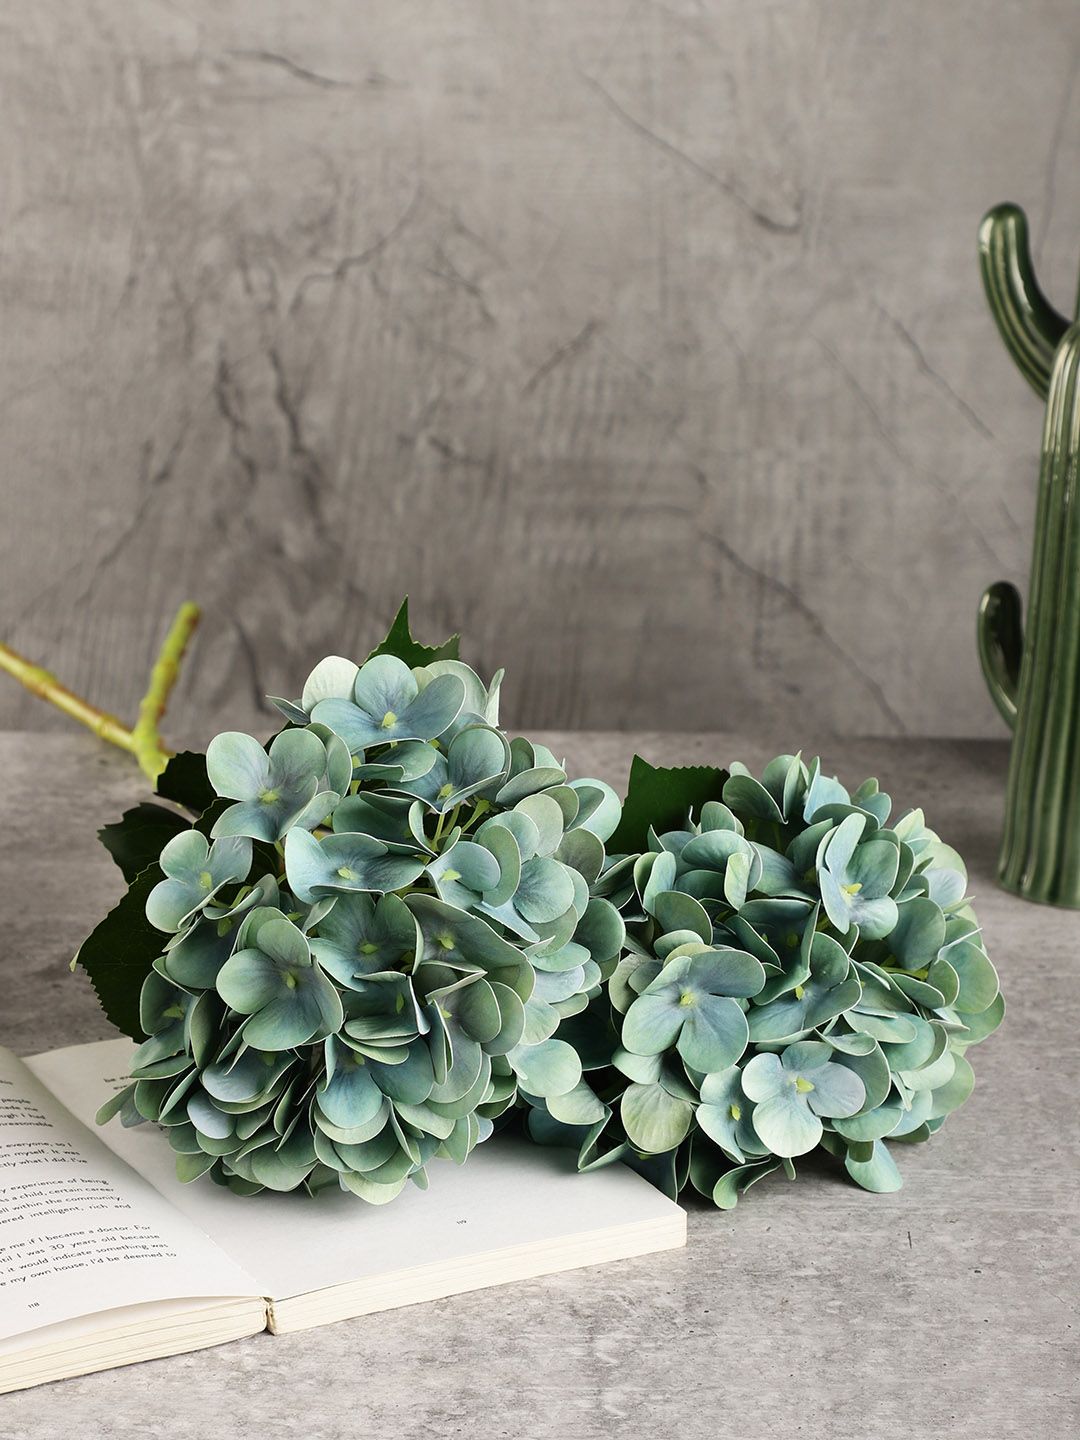 OddCroft Teal Blue & Green Hydrangea Artificial Flowers Price in India